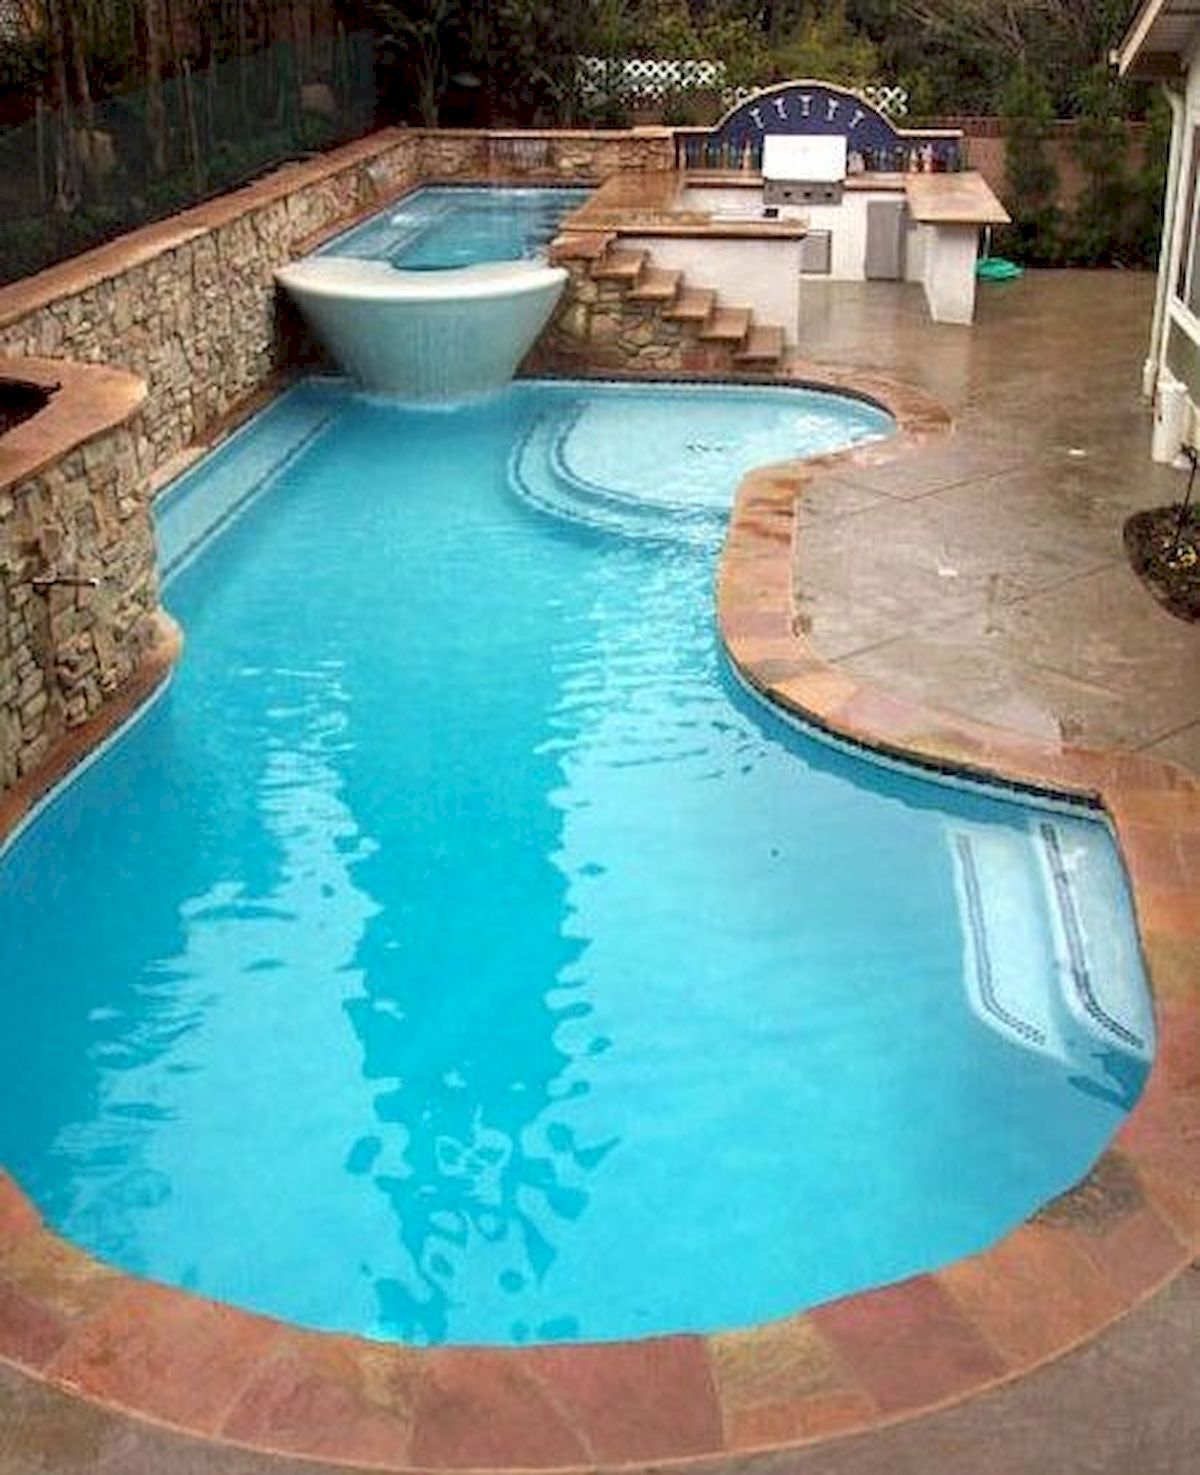 50 Gorgeous Small Swimming Pool Ideas for Small Backyard (With images ...